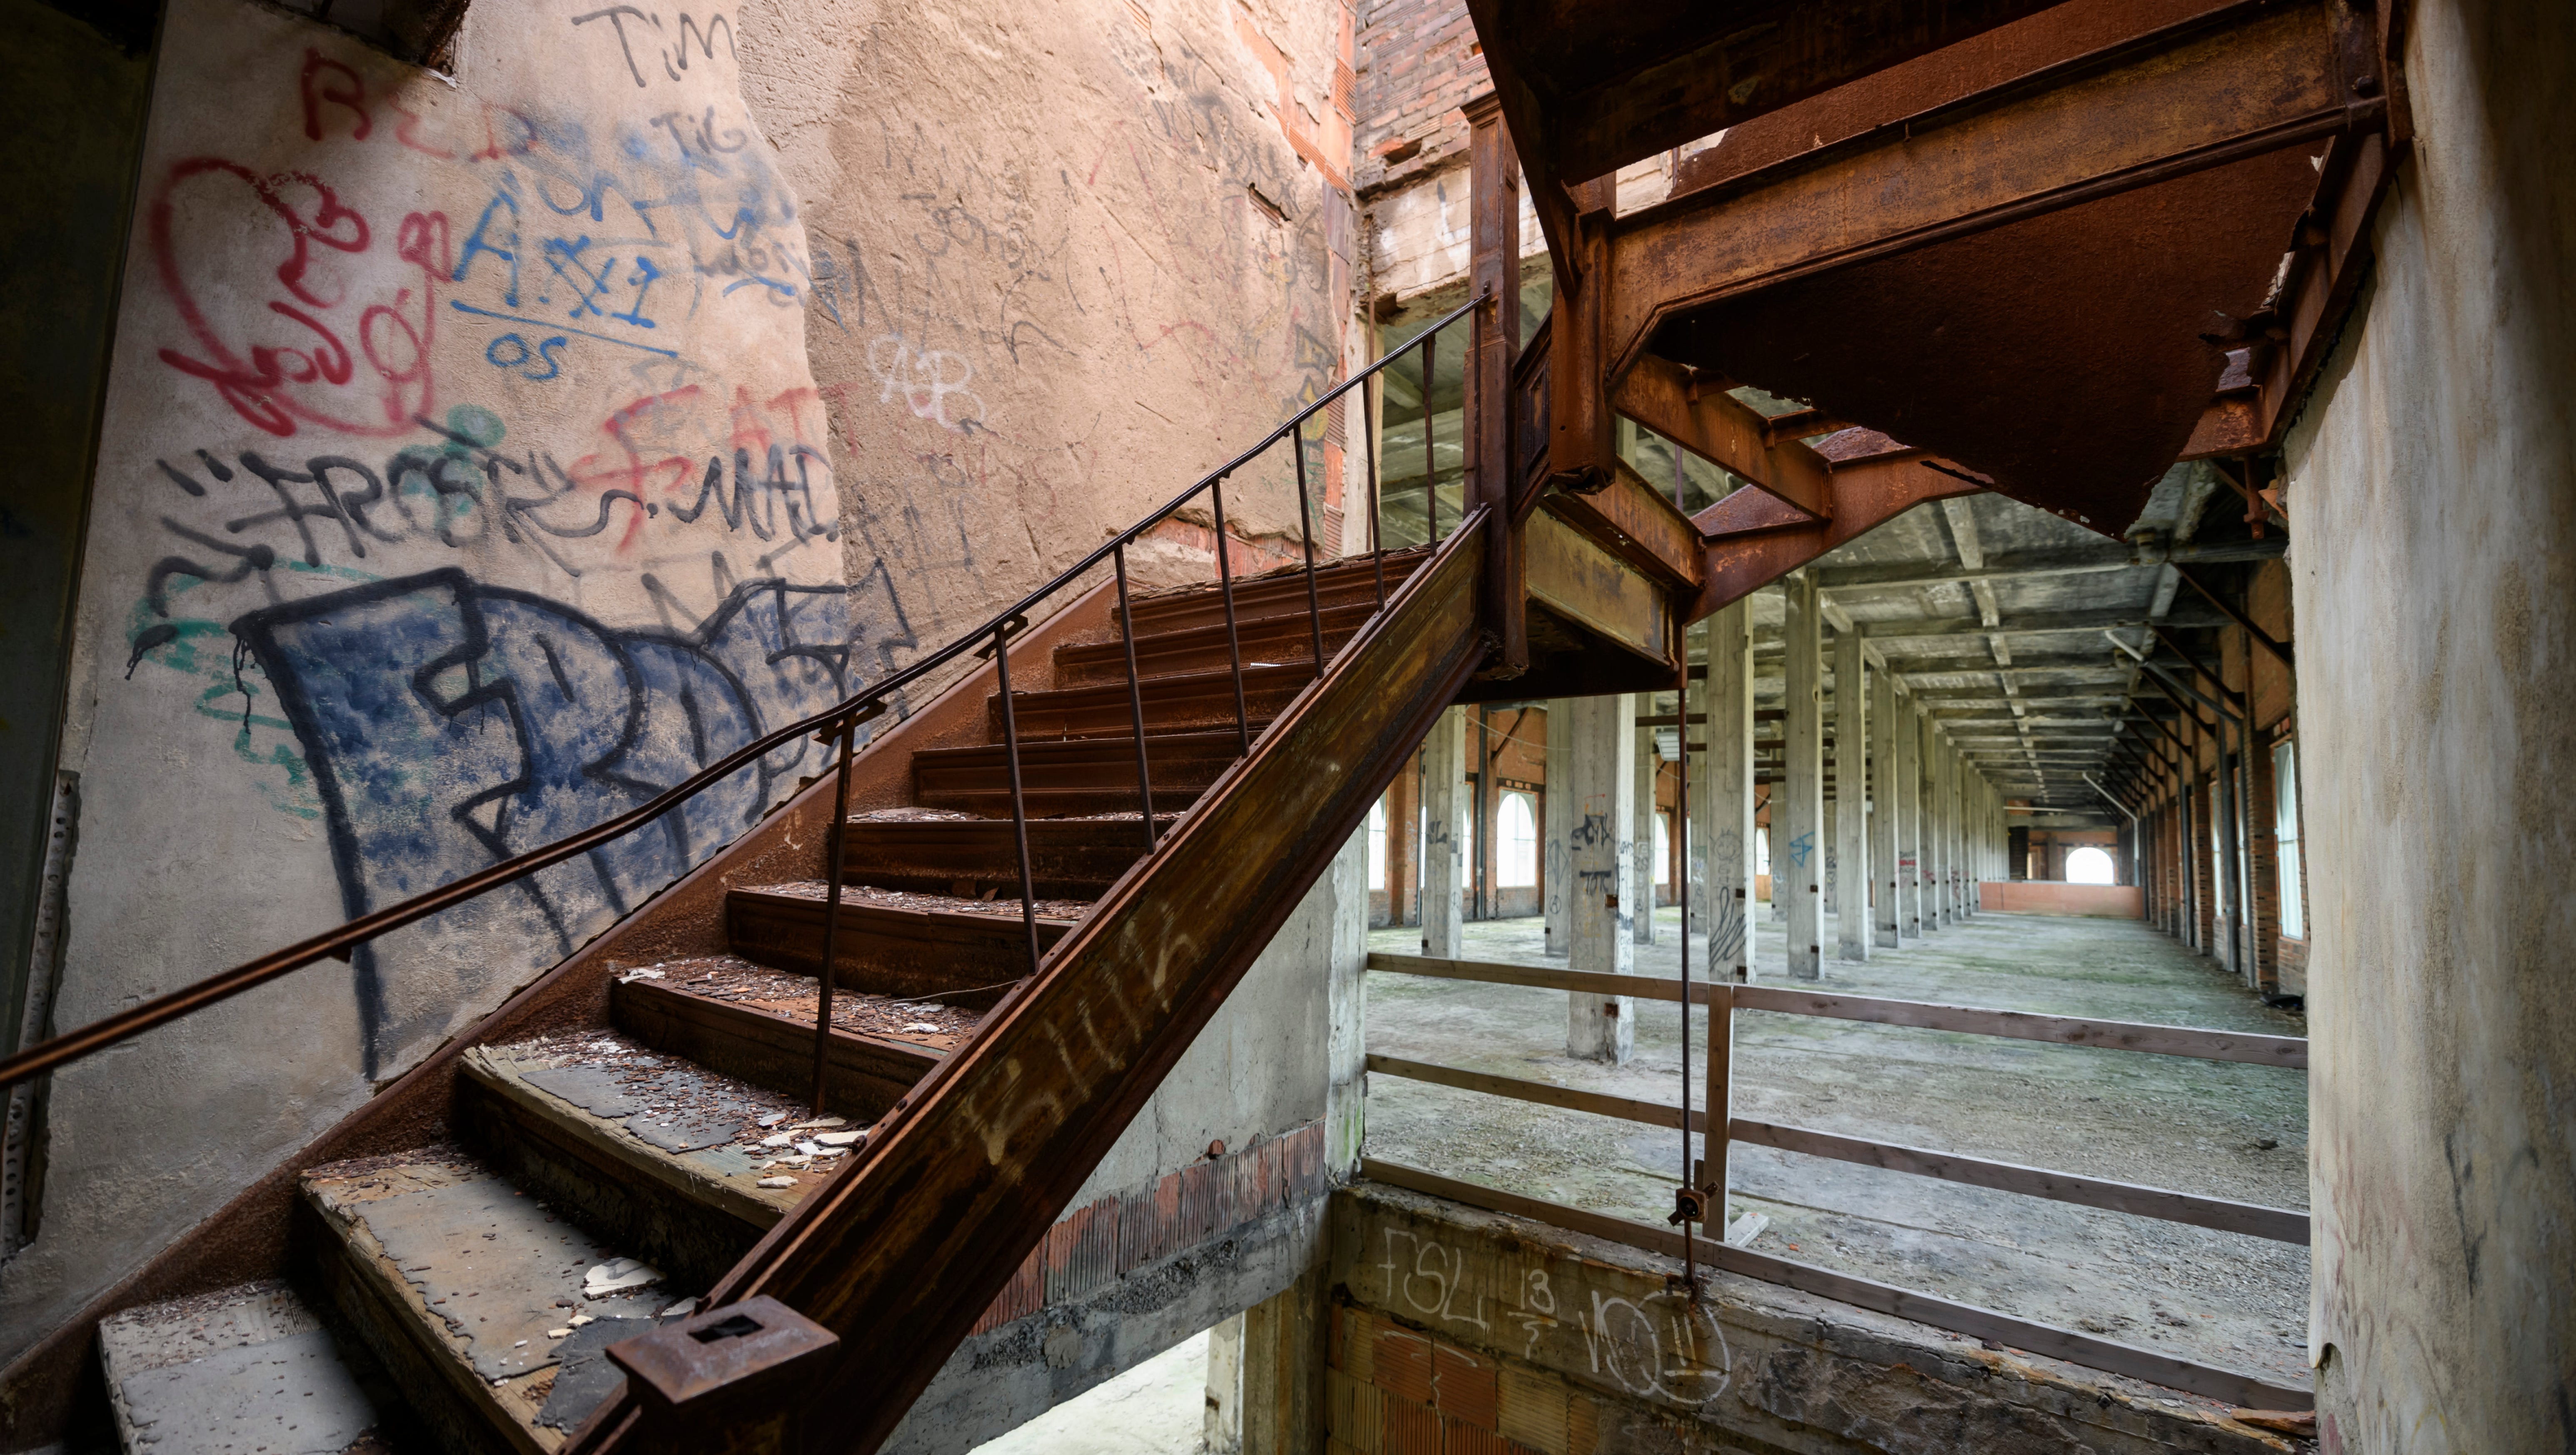 Hackett said the Corktown project won't cost Ford any more than the estimated $1 billion it budgeted for the Dearborn transformation plan. Money for the Corktown outpost came out of that original budget. Above, a stairwell on the top floor of the Michigan Central Depot.